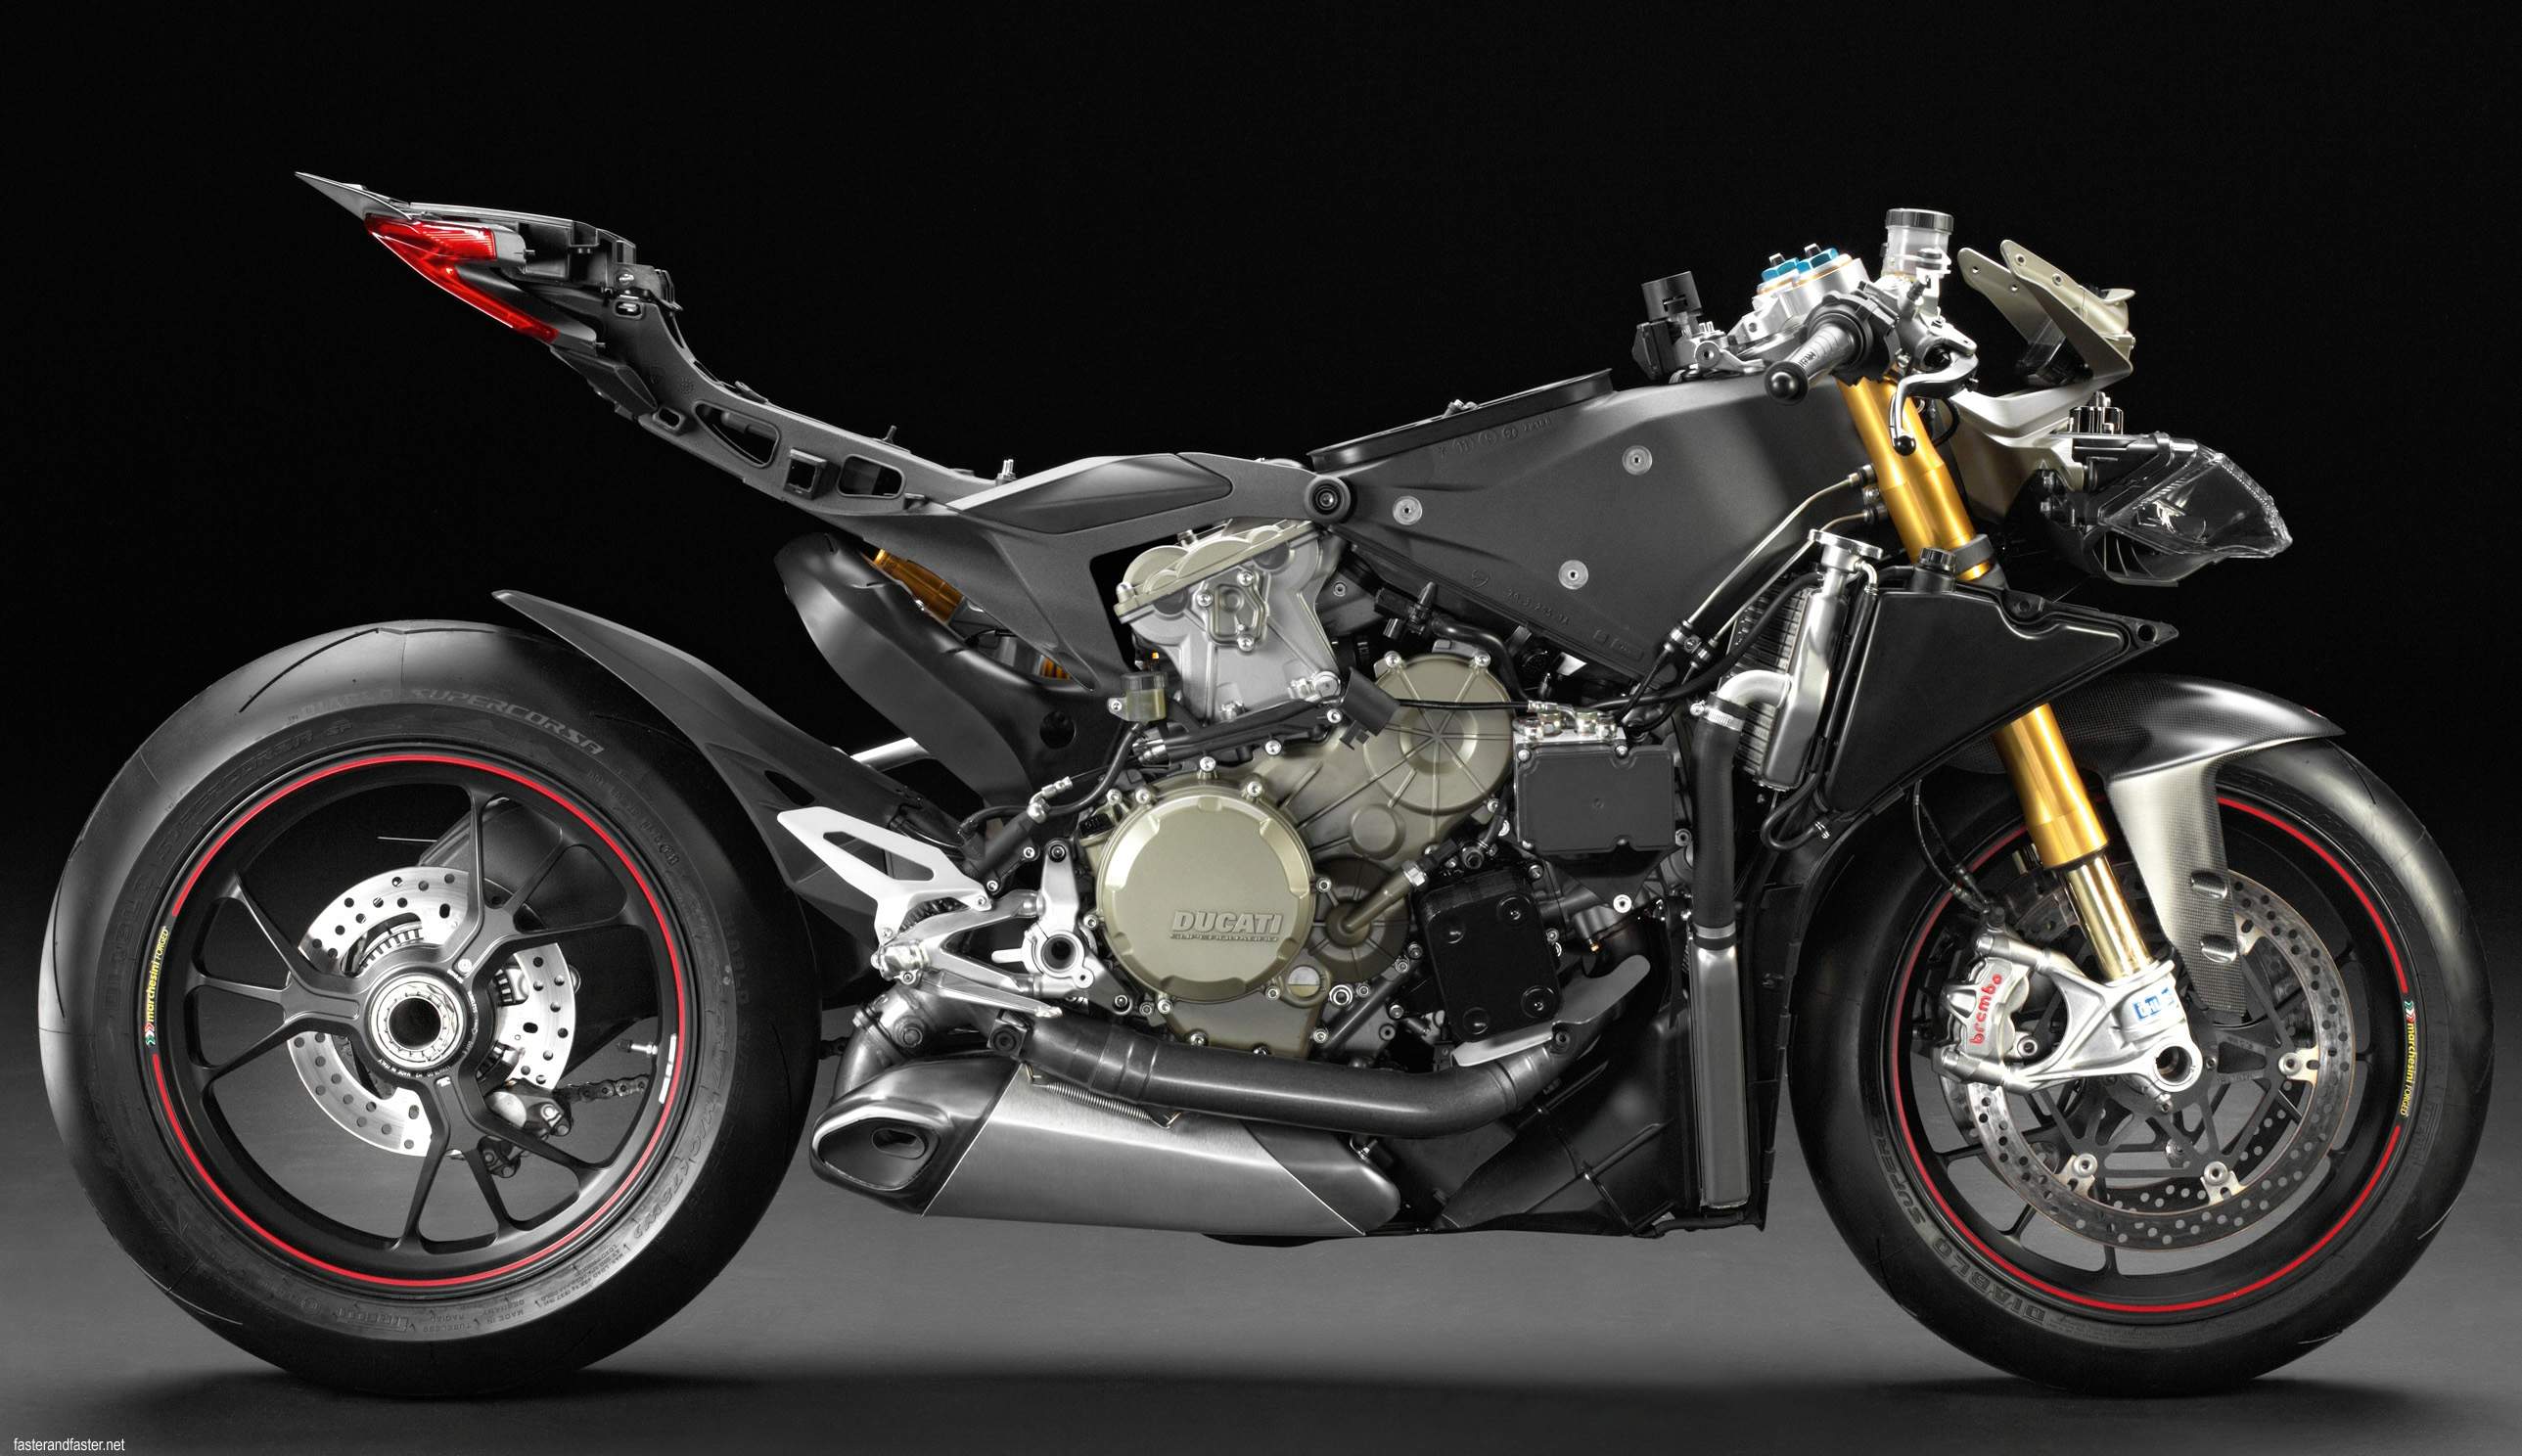 ducati-rumored-to-ditch-the-superquadro-engine-and-replace-it-with-a-motogp-derived-v4-99238_1